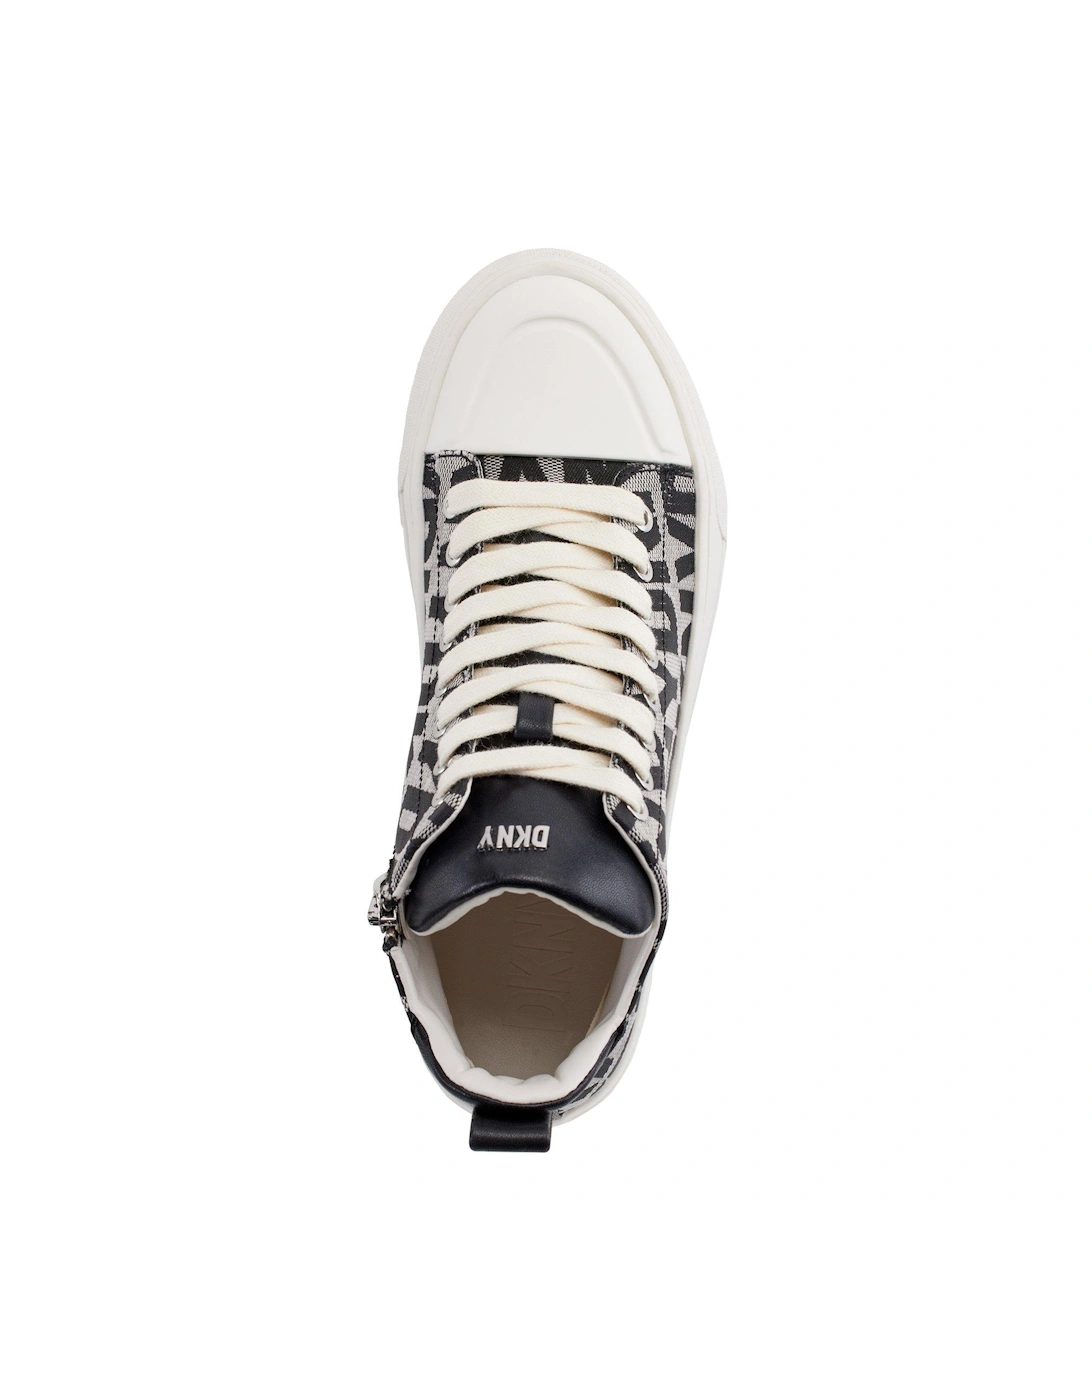 Yaser - Lace Up Mid Sneaker - Black/white,chi - Chino